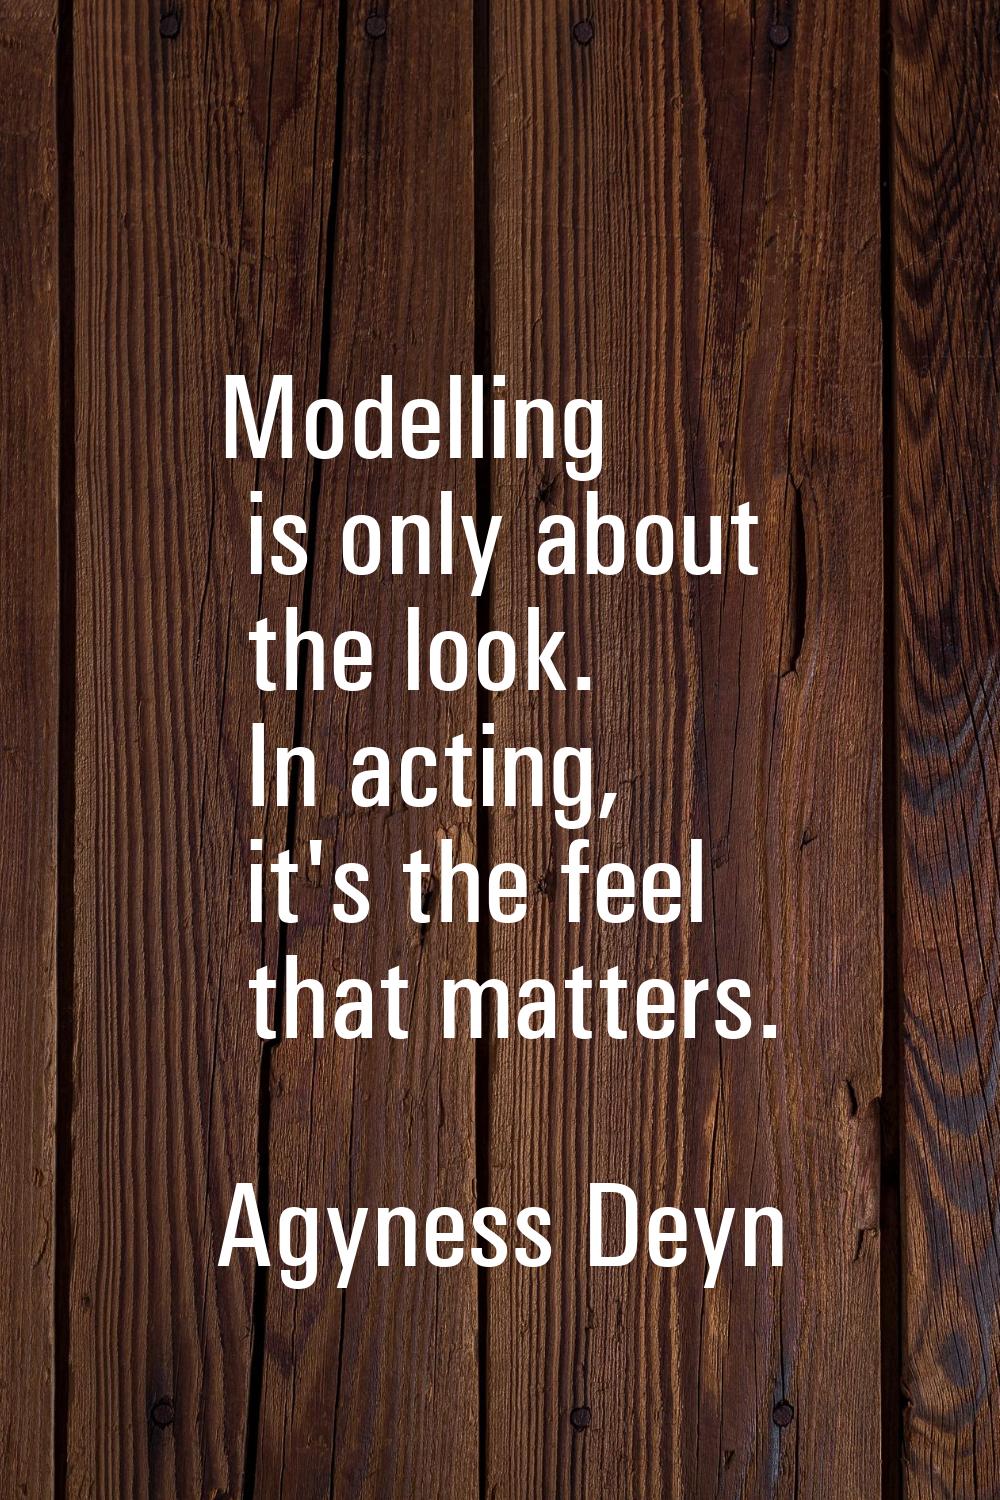 Modelling is only about the look. In acting, it's the feel that matters.